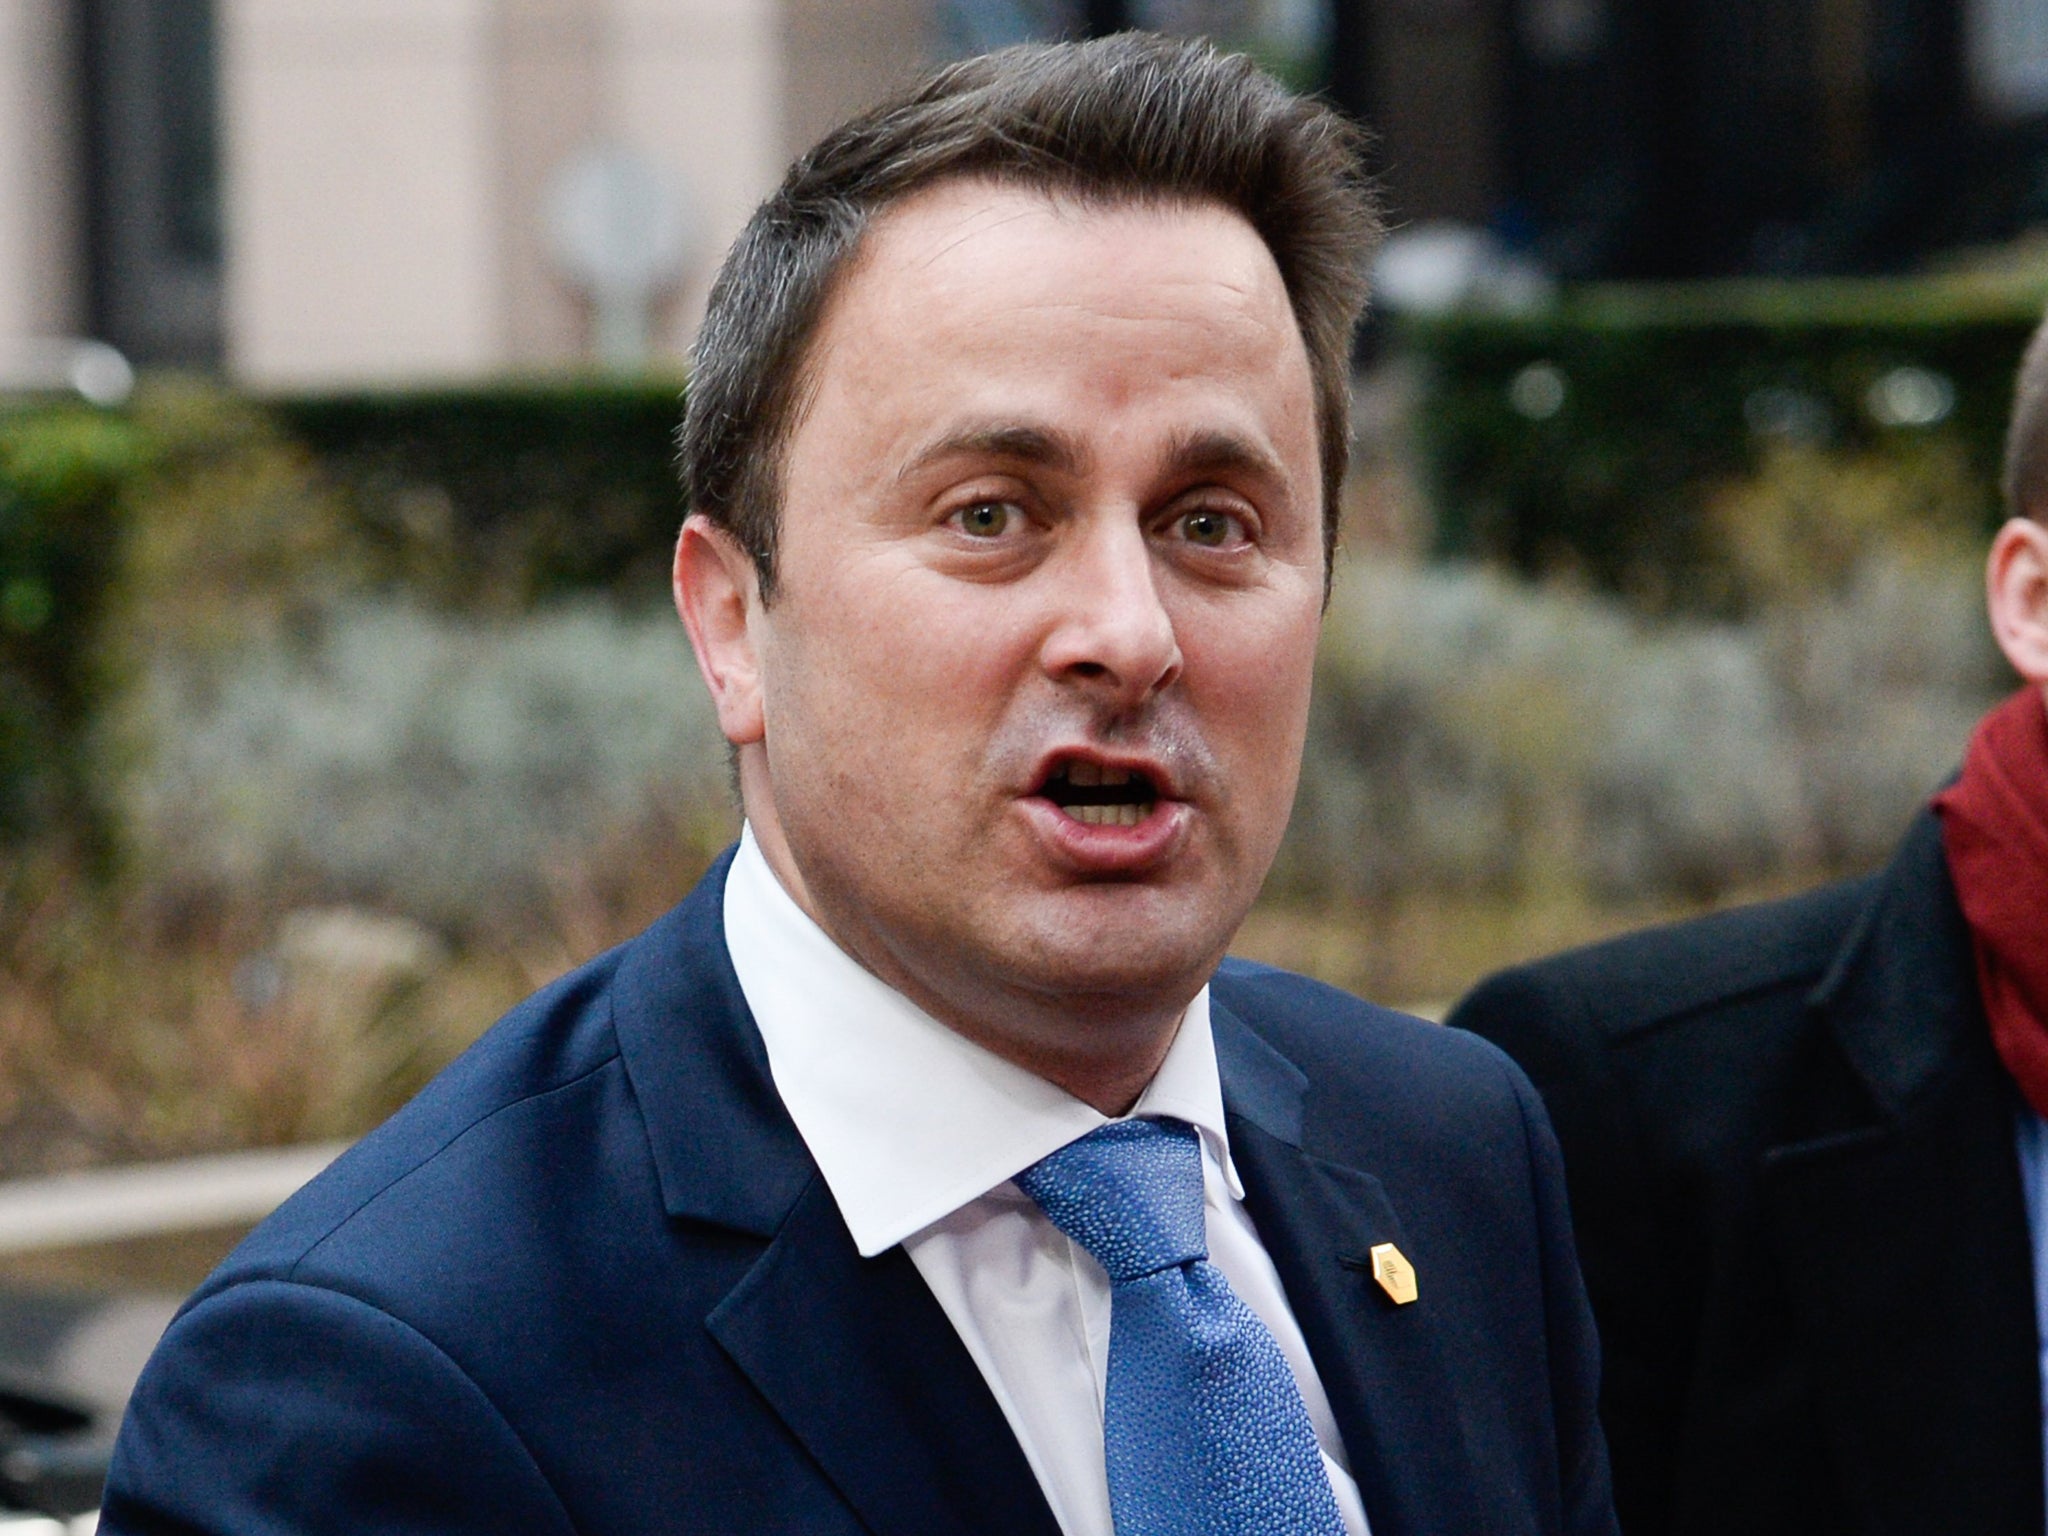 Luxembourg PM Xavier Bettel is set to marry his partner